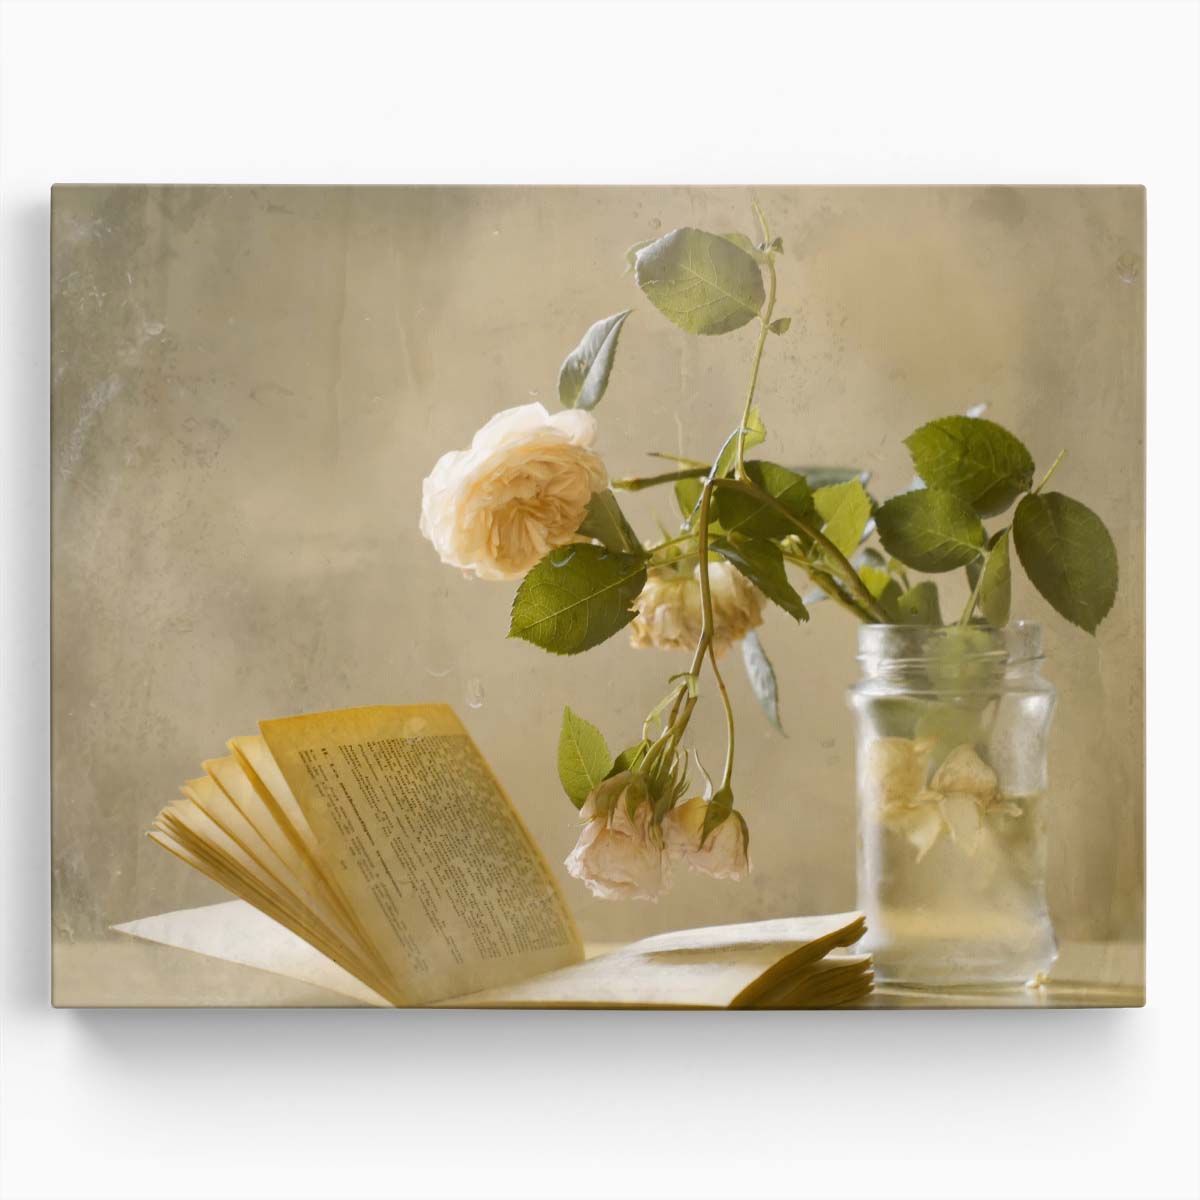 Vintage Floral & Book Still Life Wall Art by Luxuriance Designs. Made in USA.